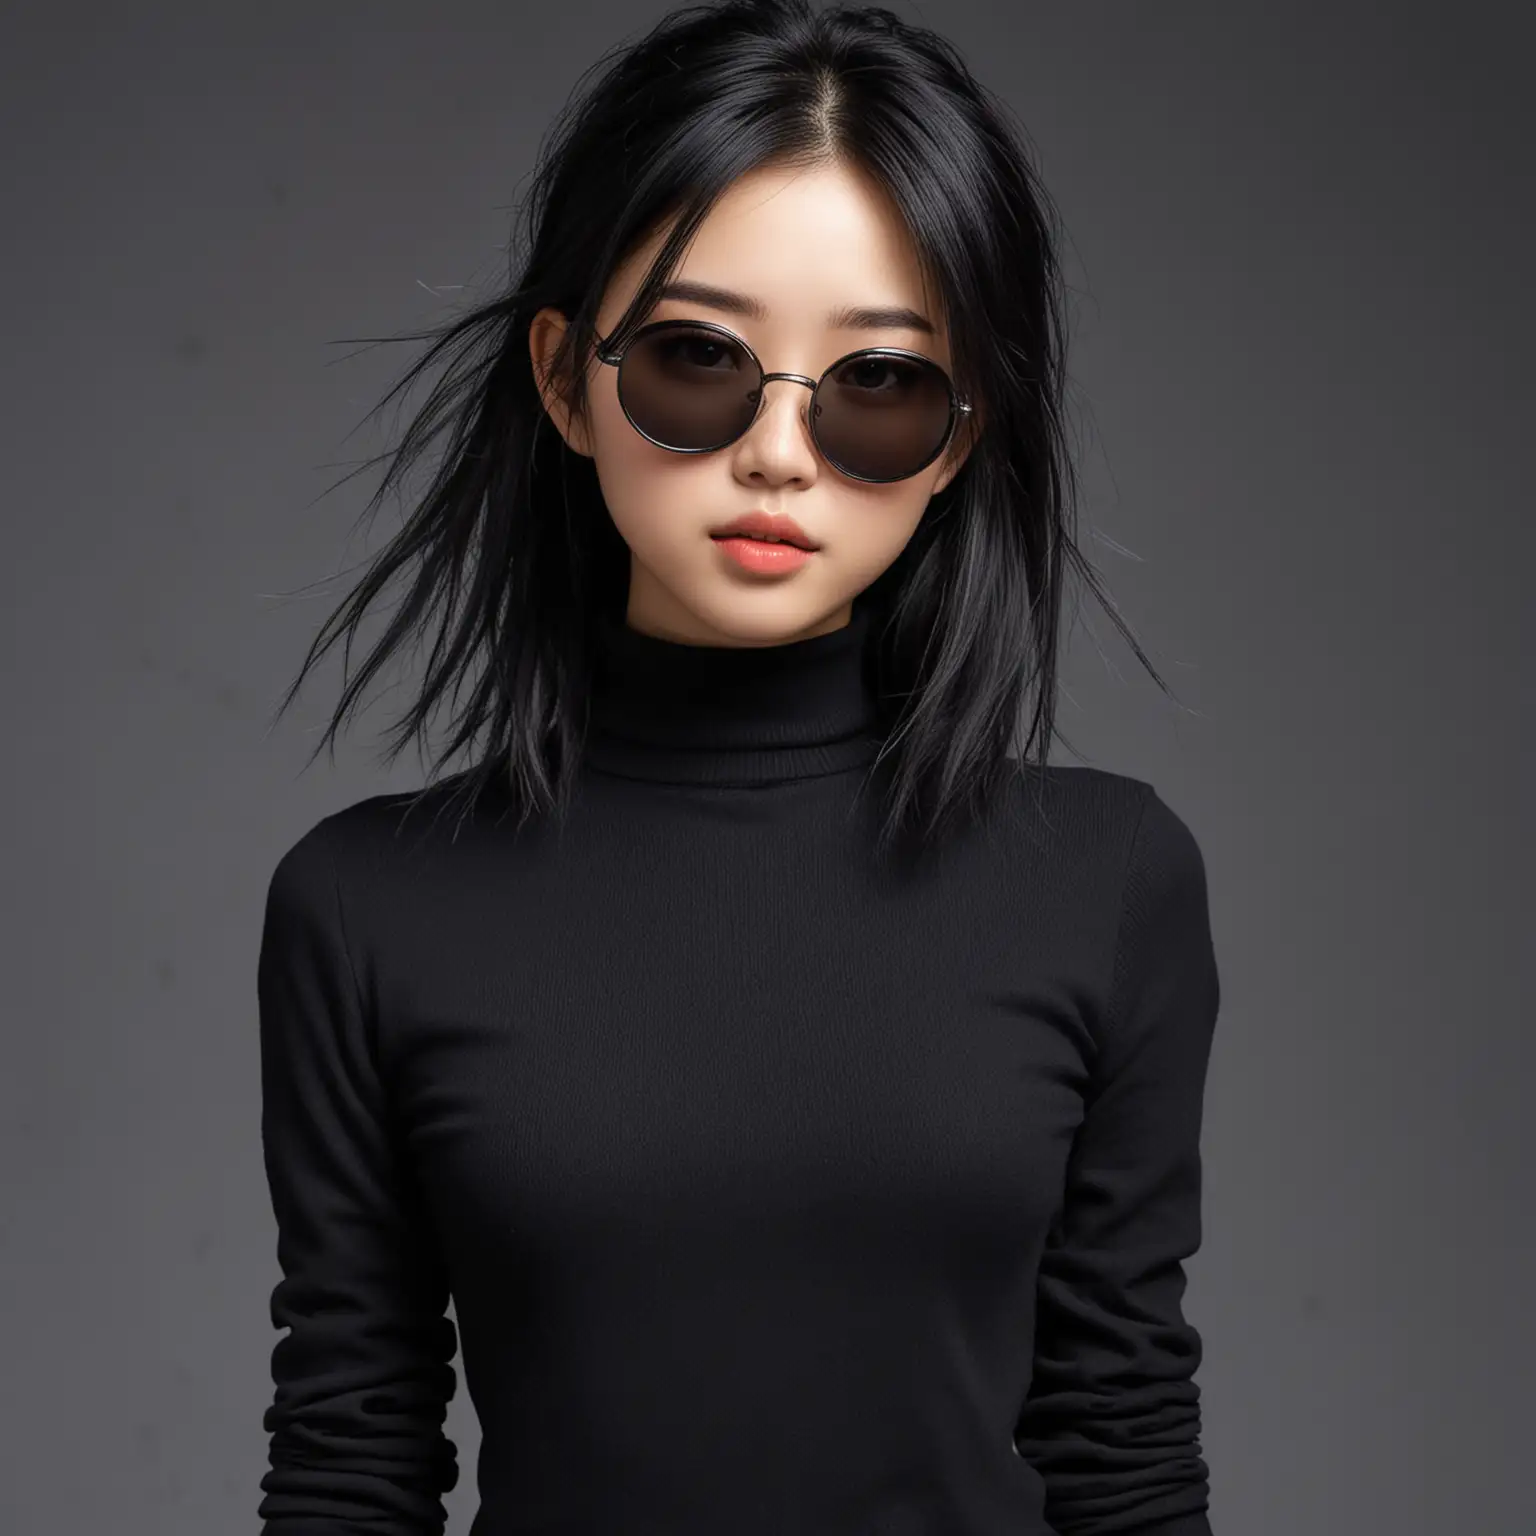 Stylish-Asian-Girl-in-Black-SlimFit-Suit-and-Sunglasses